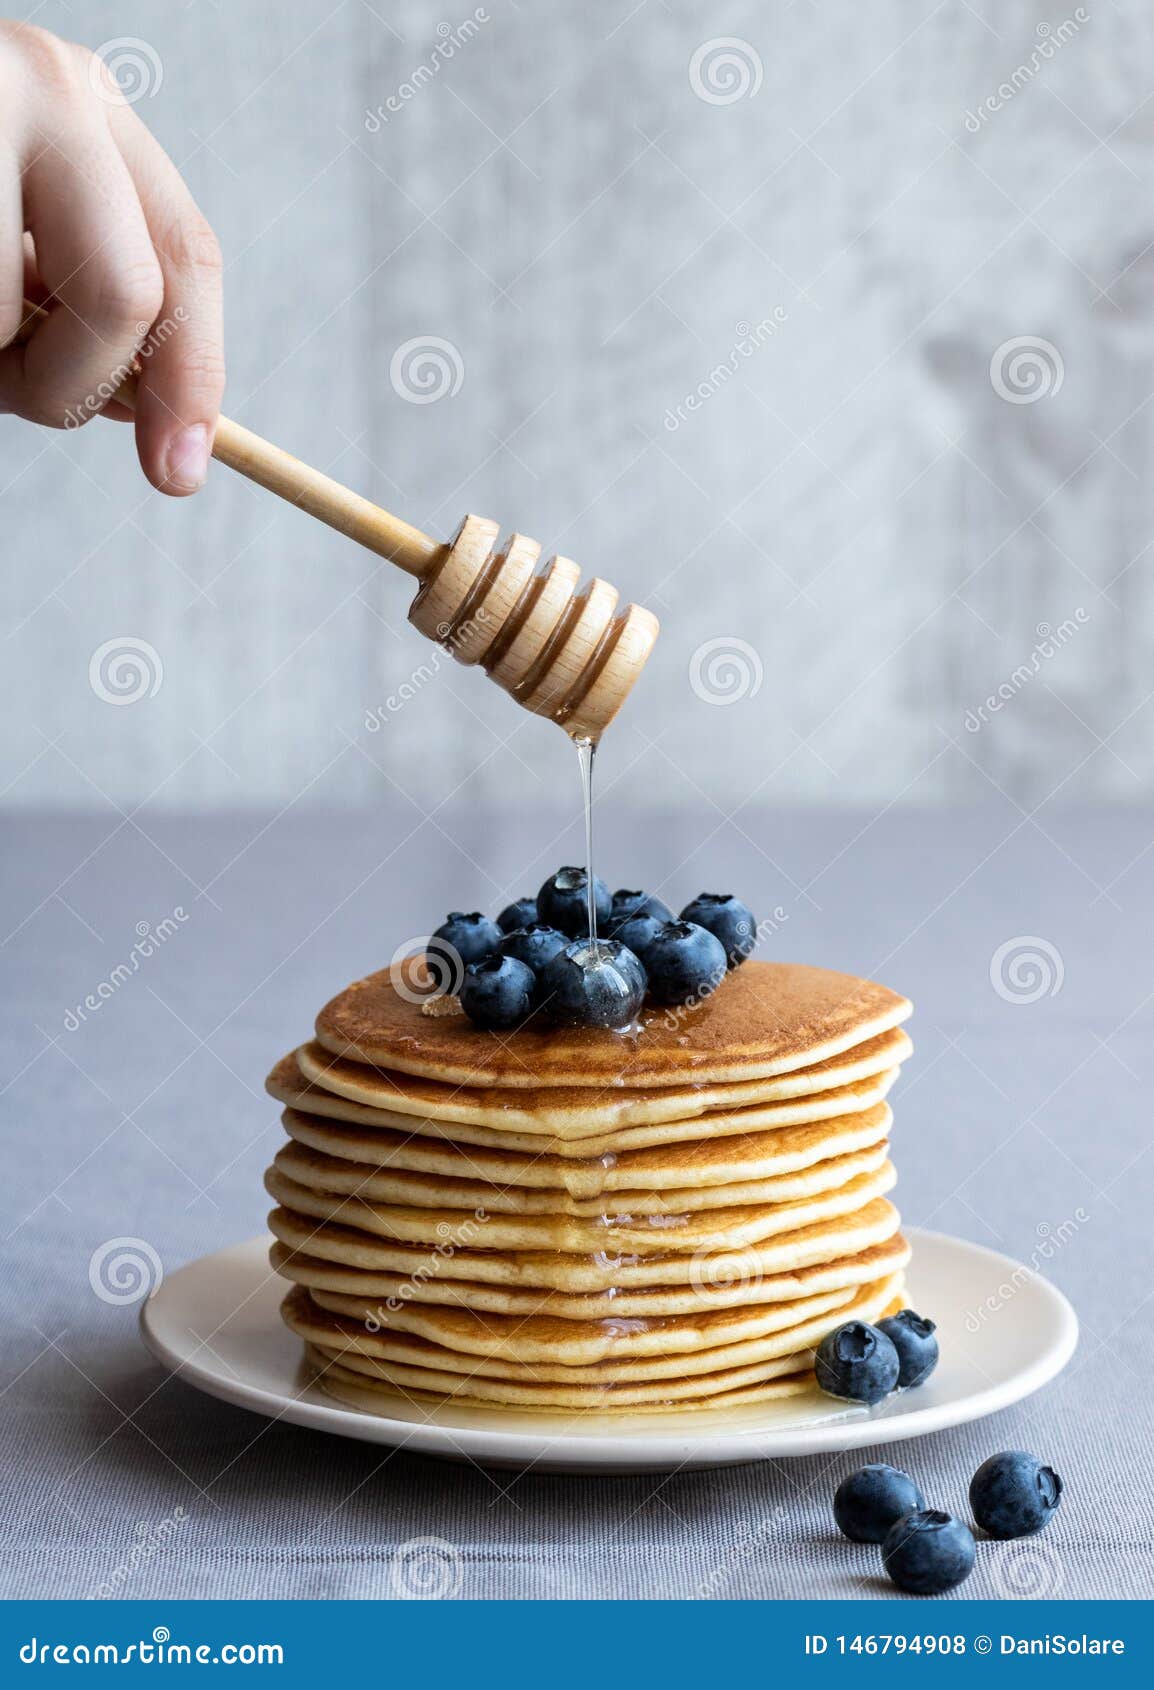 Pancakes with blueberries and honey of acacia on a neutral background. Pancakes with blueberries and honey of acacia on a light plate on a neutral background. In the hand of the child is a wooden spoon with flowing honey.